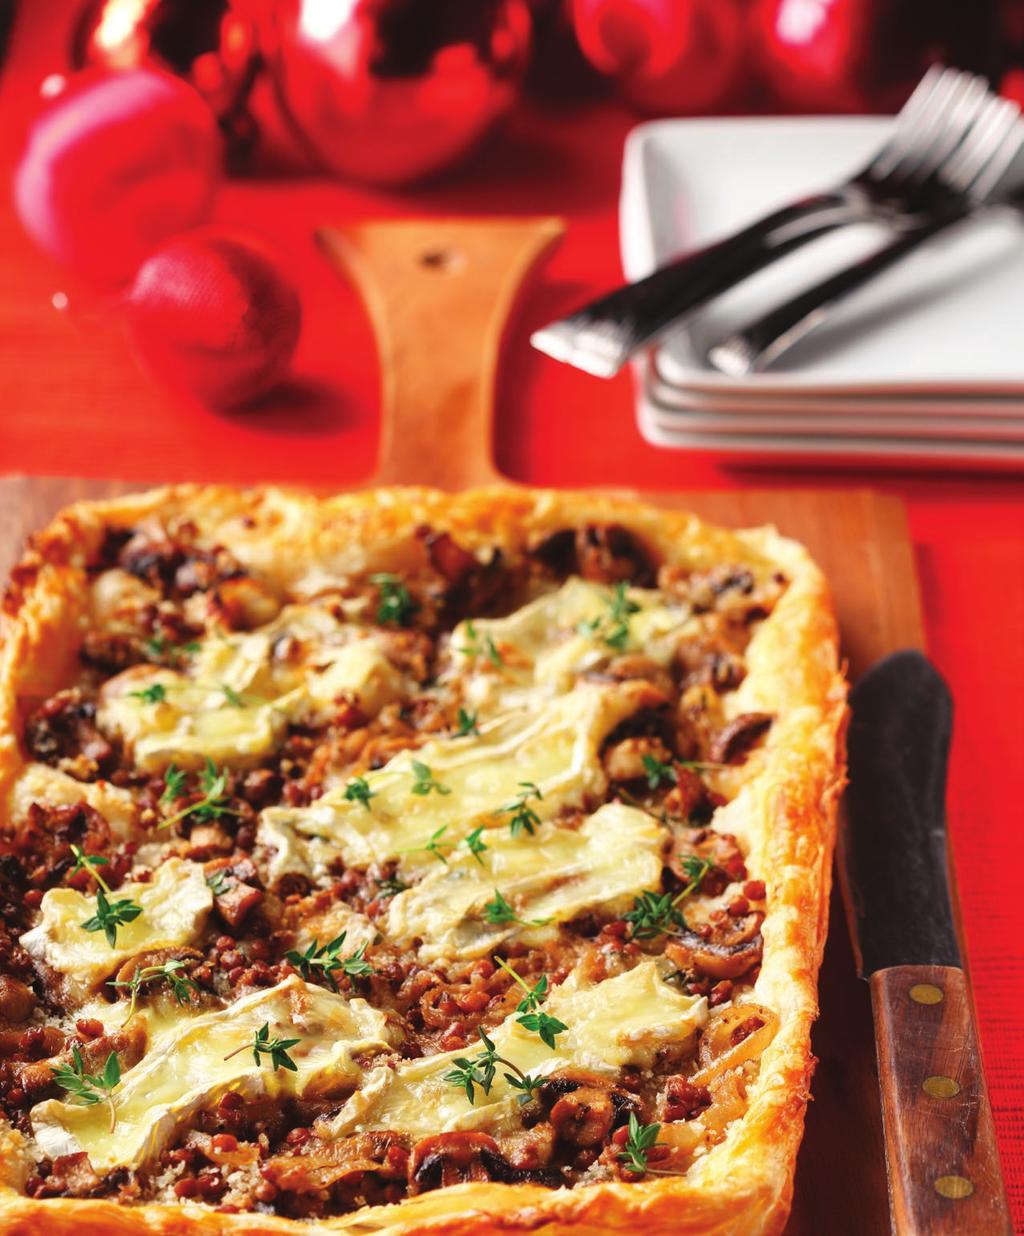 LENTIL & MUSHROOM TART WITH BRIE 1 pkg (400 g) puff pastry (defrosted) 1 egg, whisked 2 Tbsp (30 ml) bread crumbs 1 Tbsp (15 ml) unsalted butter 1 whole small onion, thinly sliced 11/2 cups (375 ml)